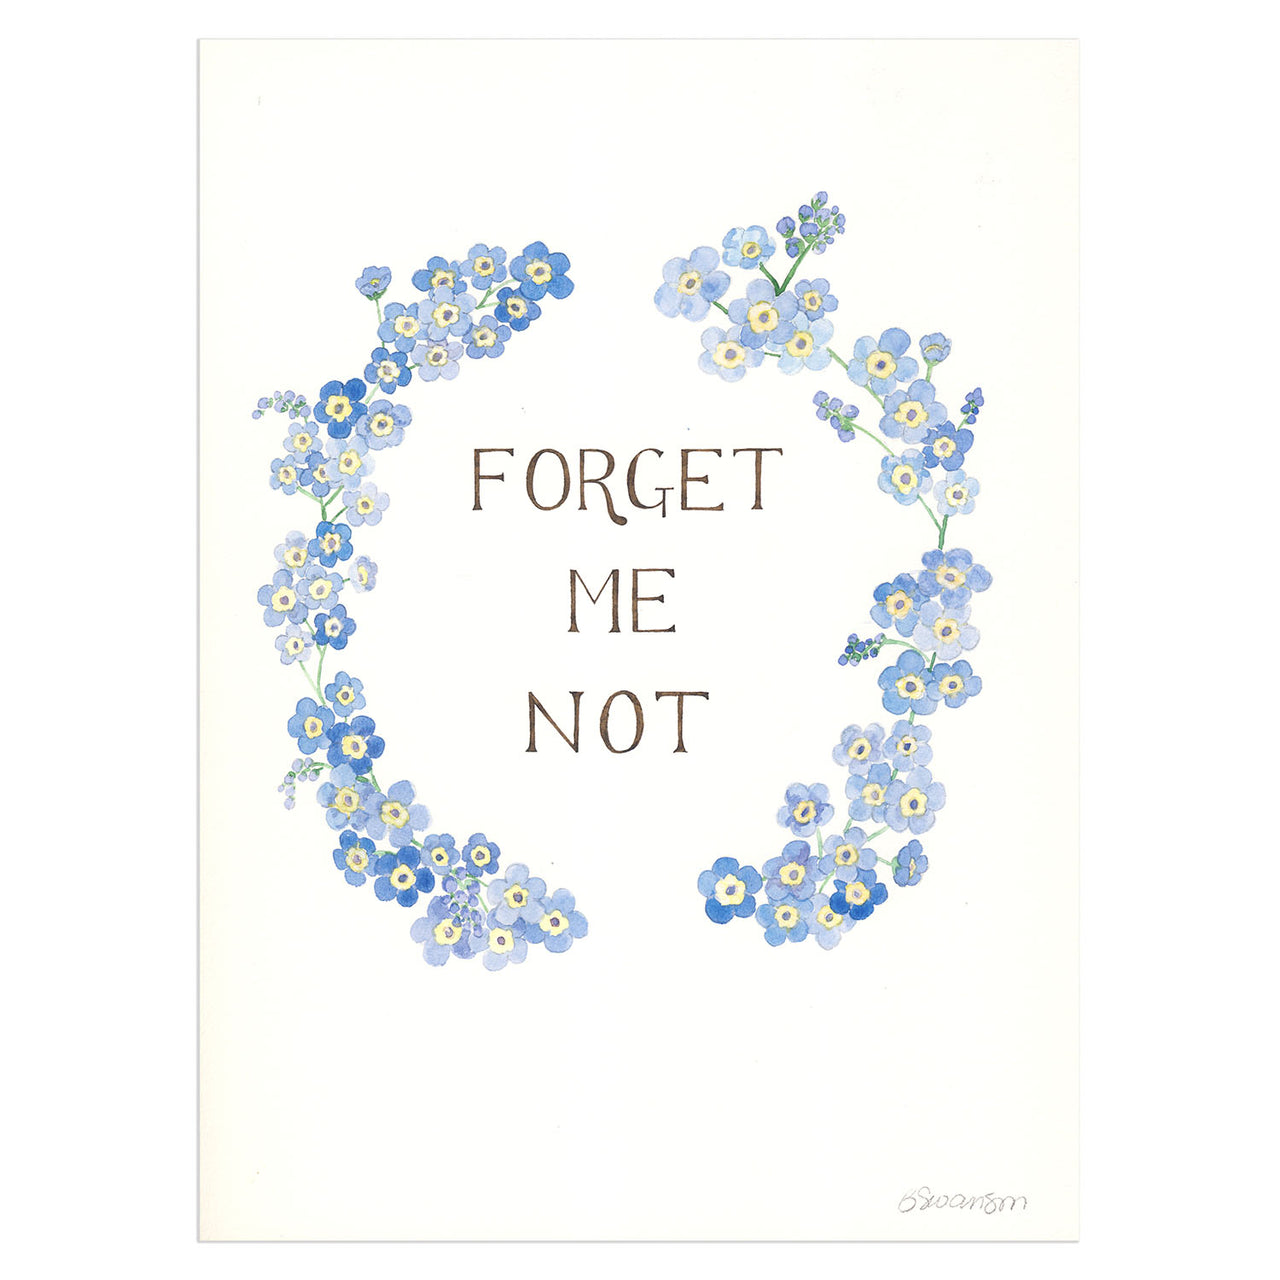 Original watercolor painting of the affirmation Forget Me Not surrounded by a garland of forget-me-not flowers